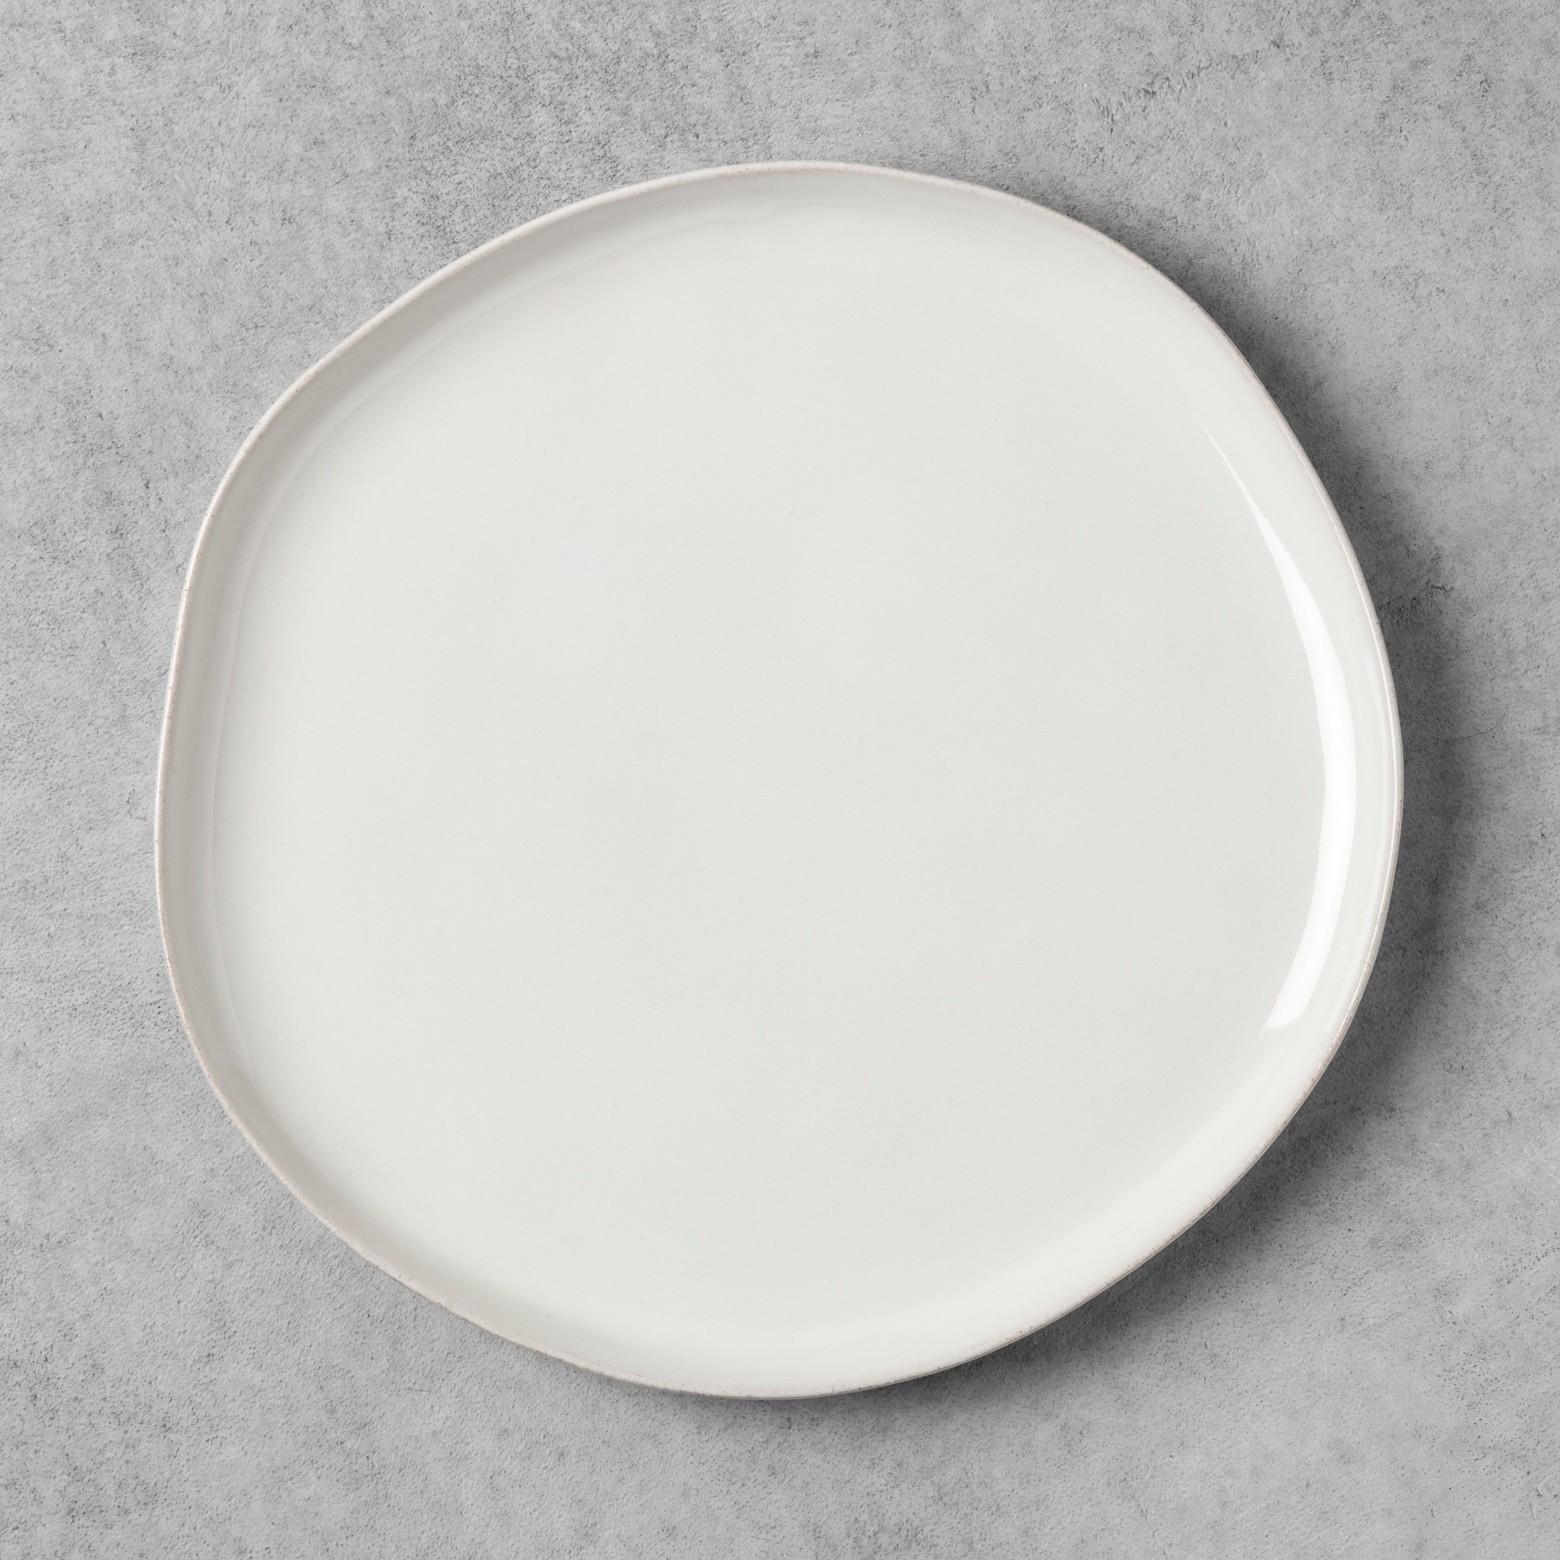 hearth and home white plate.jpg